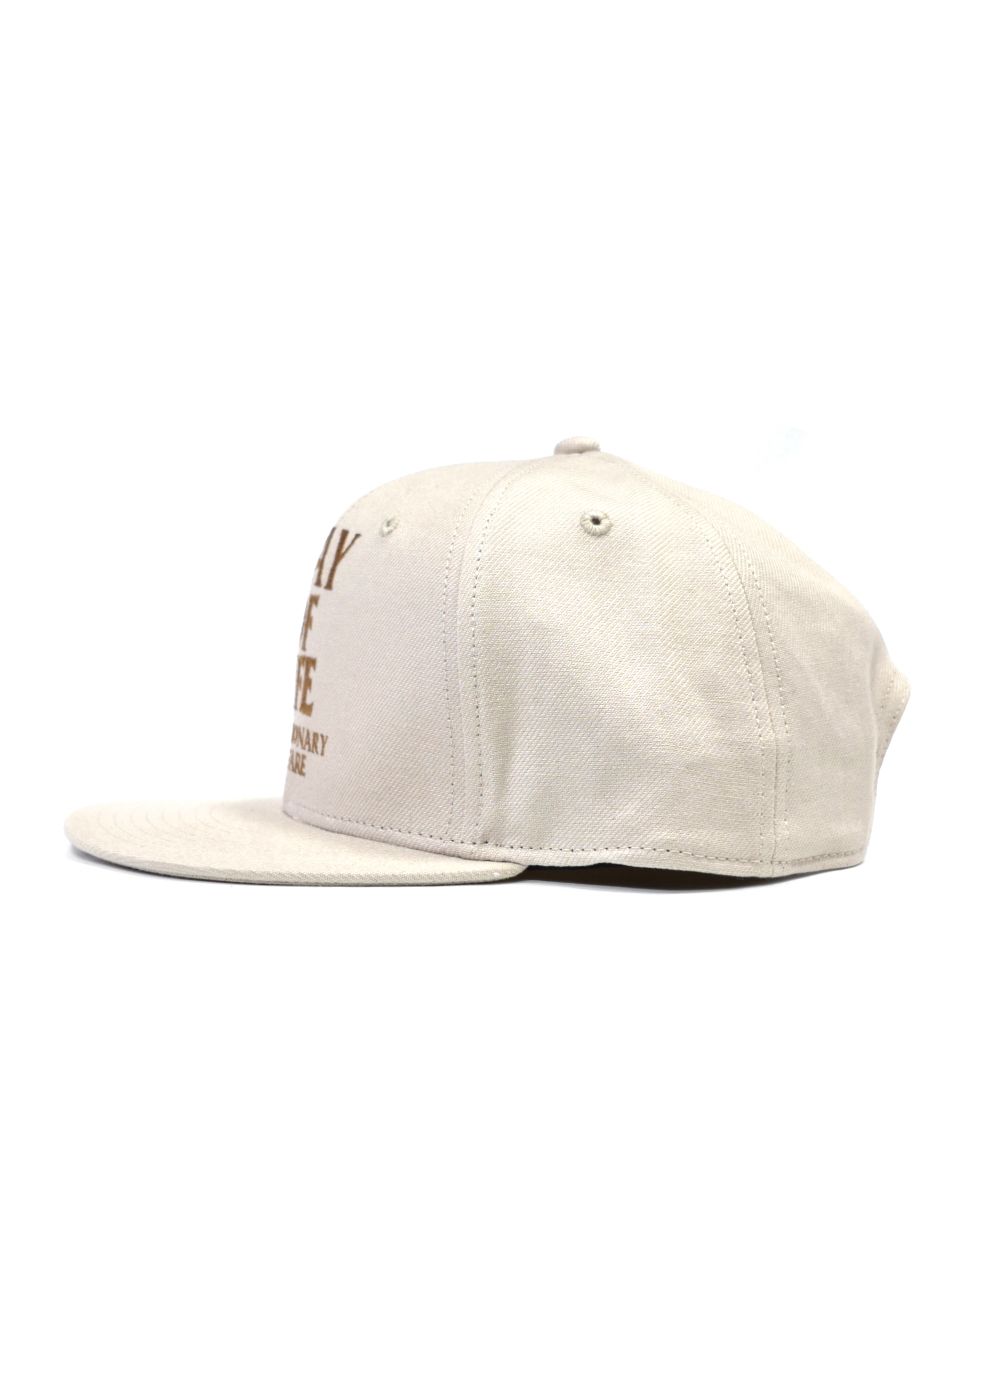 RATS - EMBROIDERY CAP "WAY OF LIFE" (BEIGE) / ロゴ刺繍ベースボール